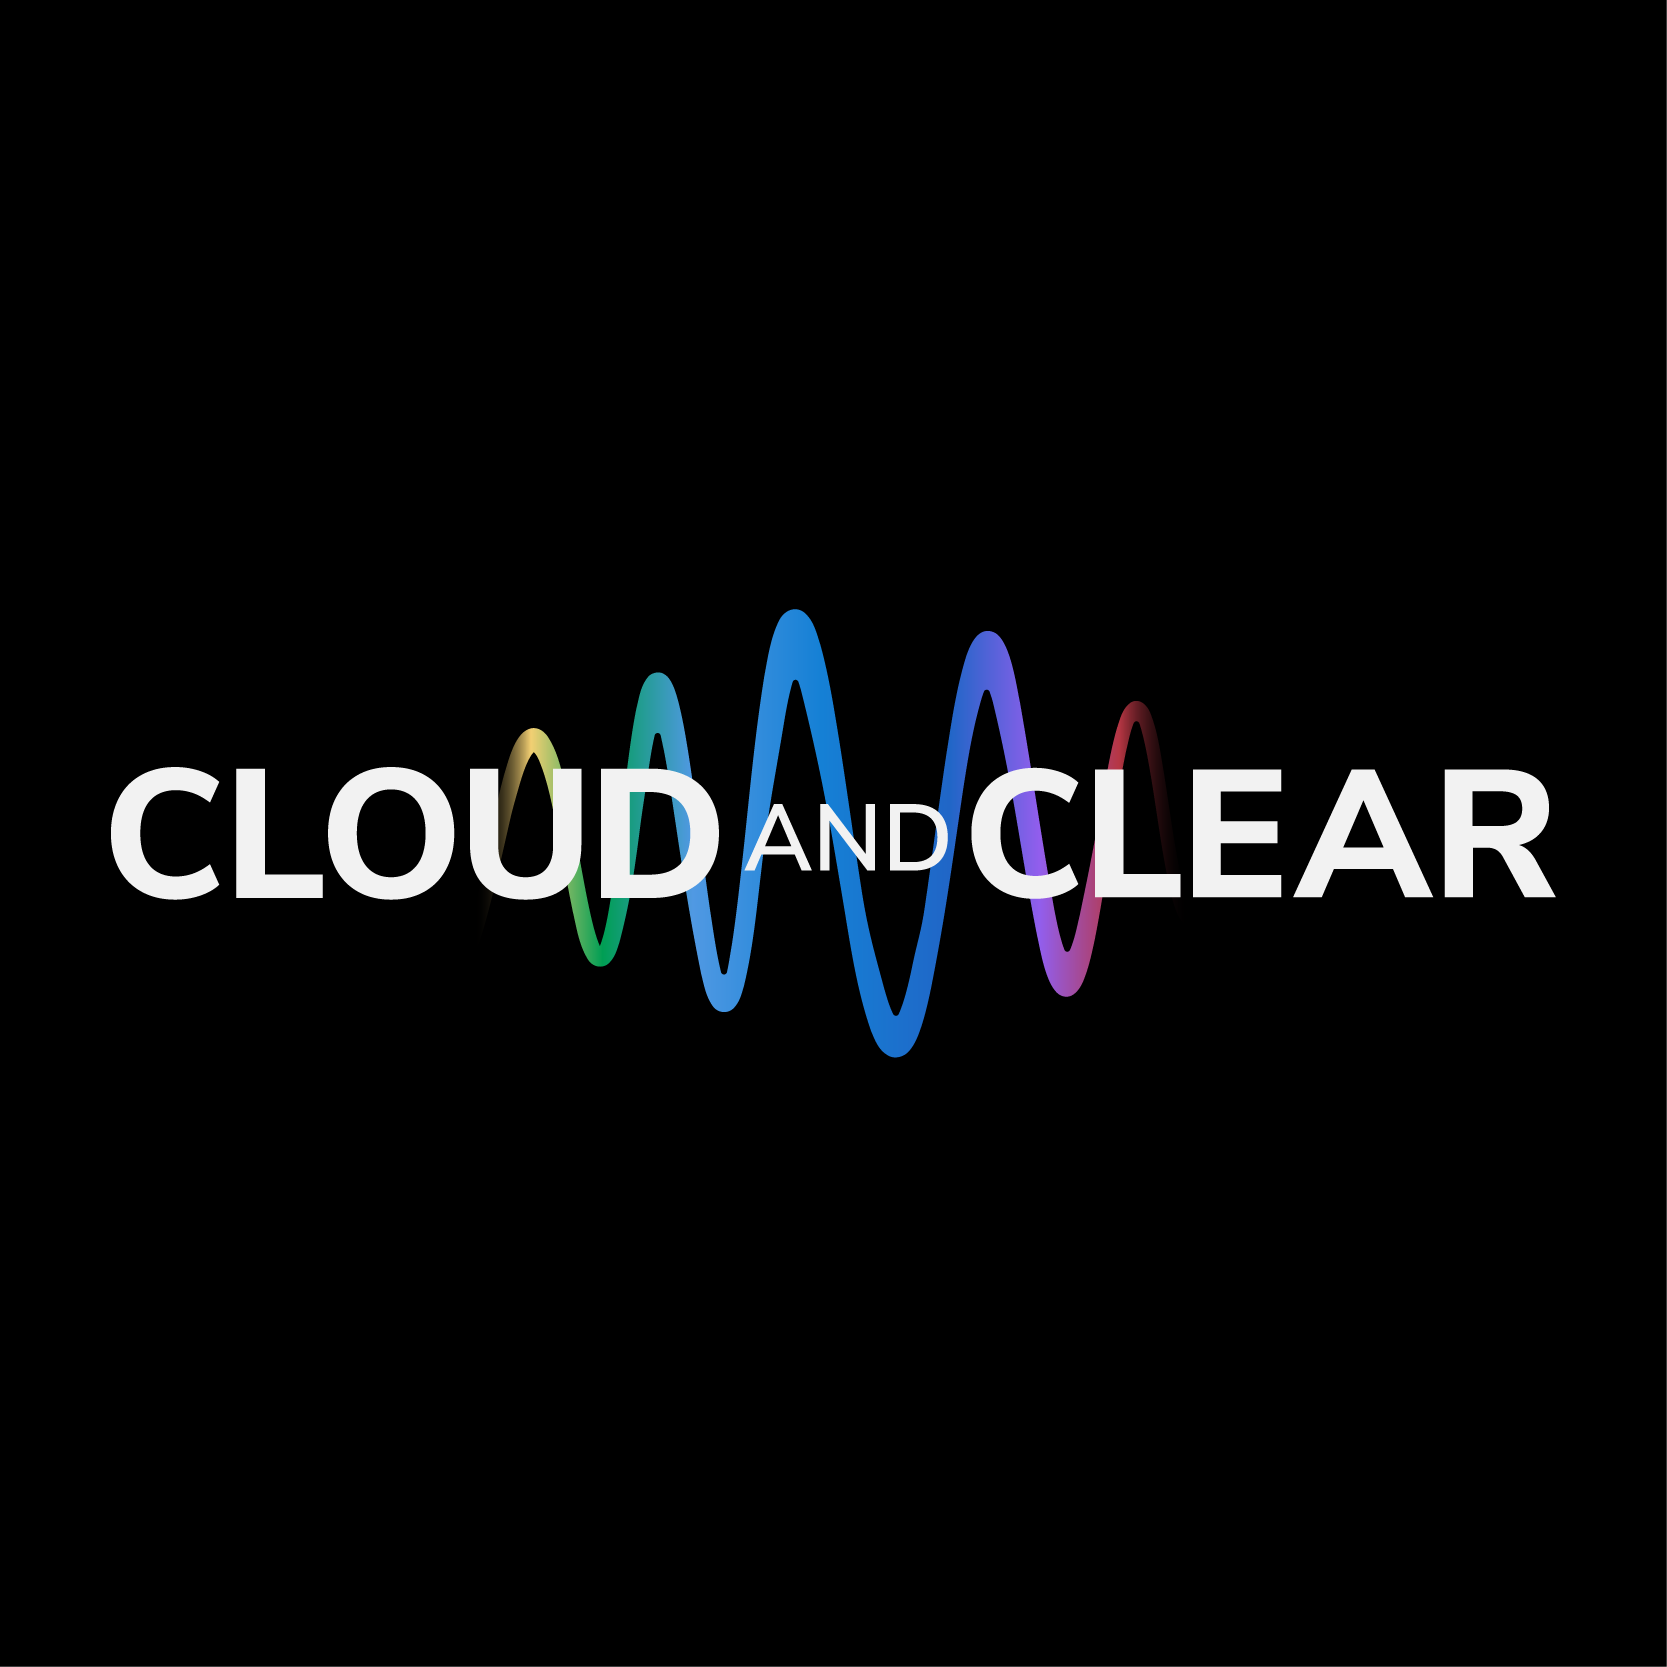 Cloud and Clear logo